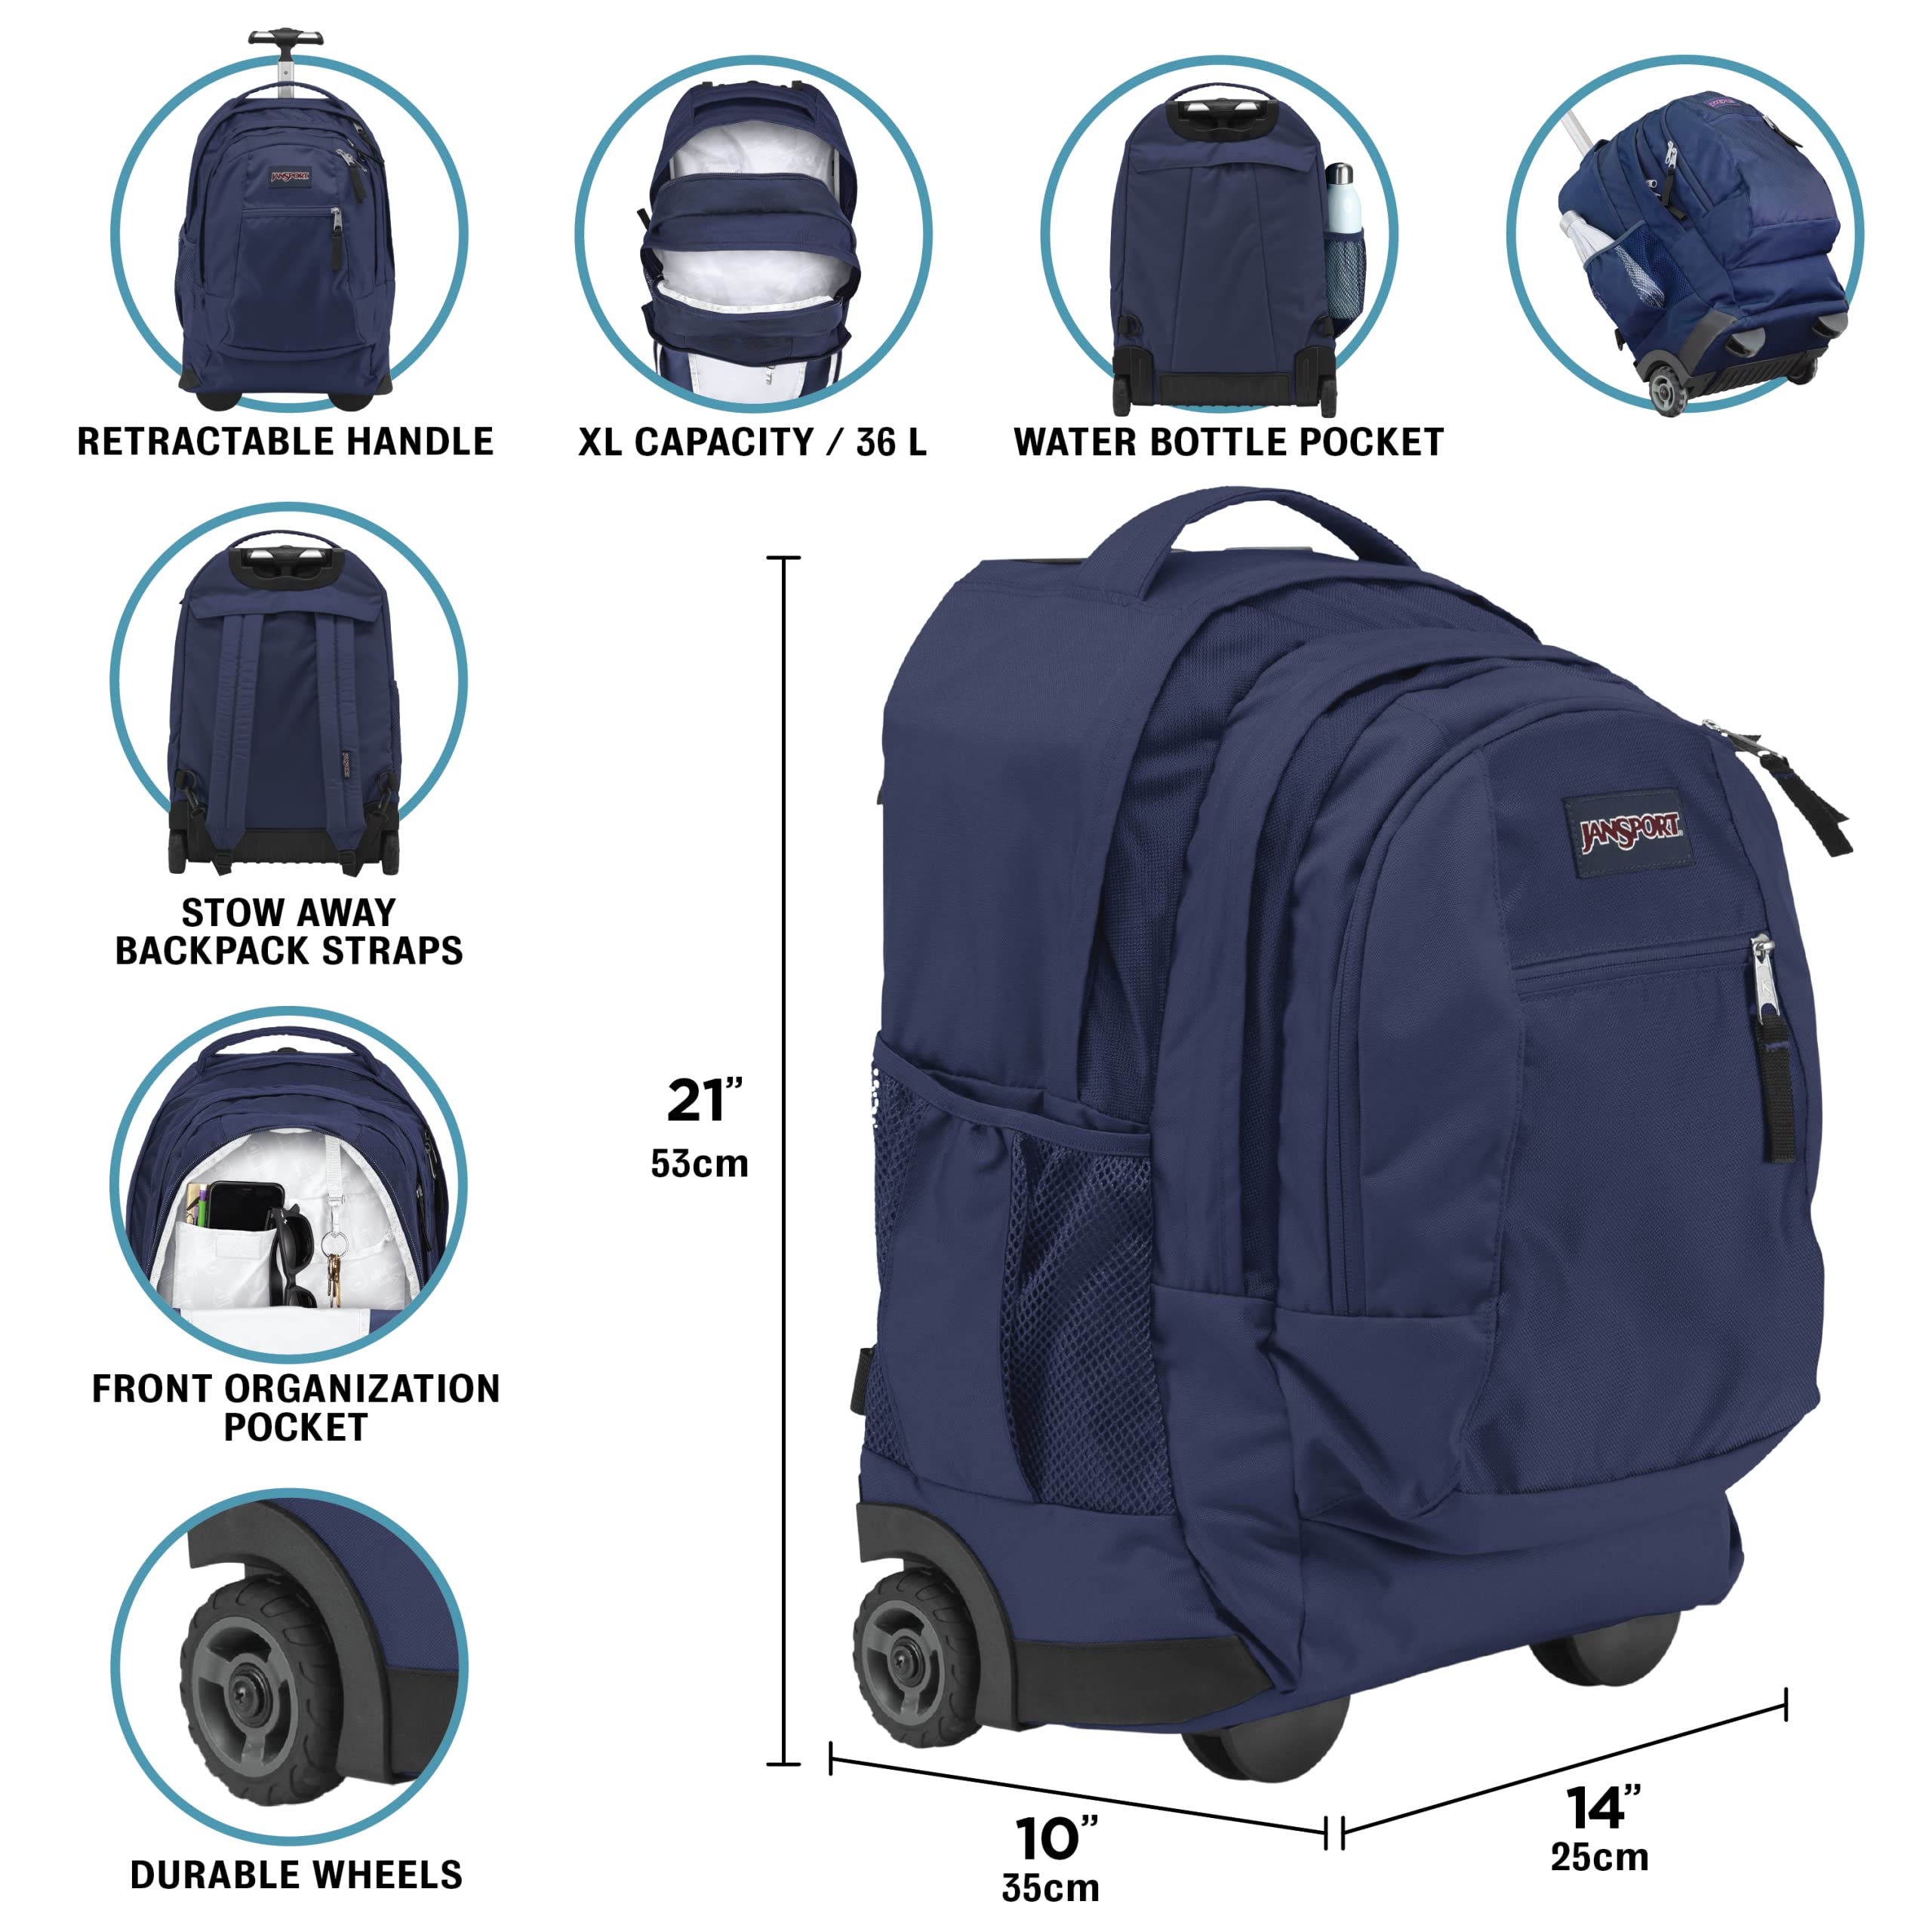 JanSport Driver 8 Rolling Backpack and Computer Bag for College Navy - Durable Laptop Backpack with Wheels, Tuckaway Straps, 15-inch Laptop Sleeve - Premium Bookbag Rucksack